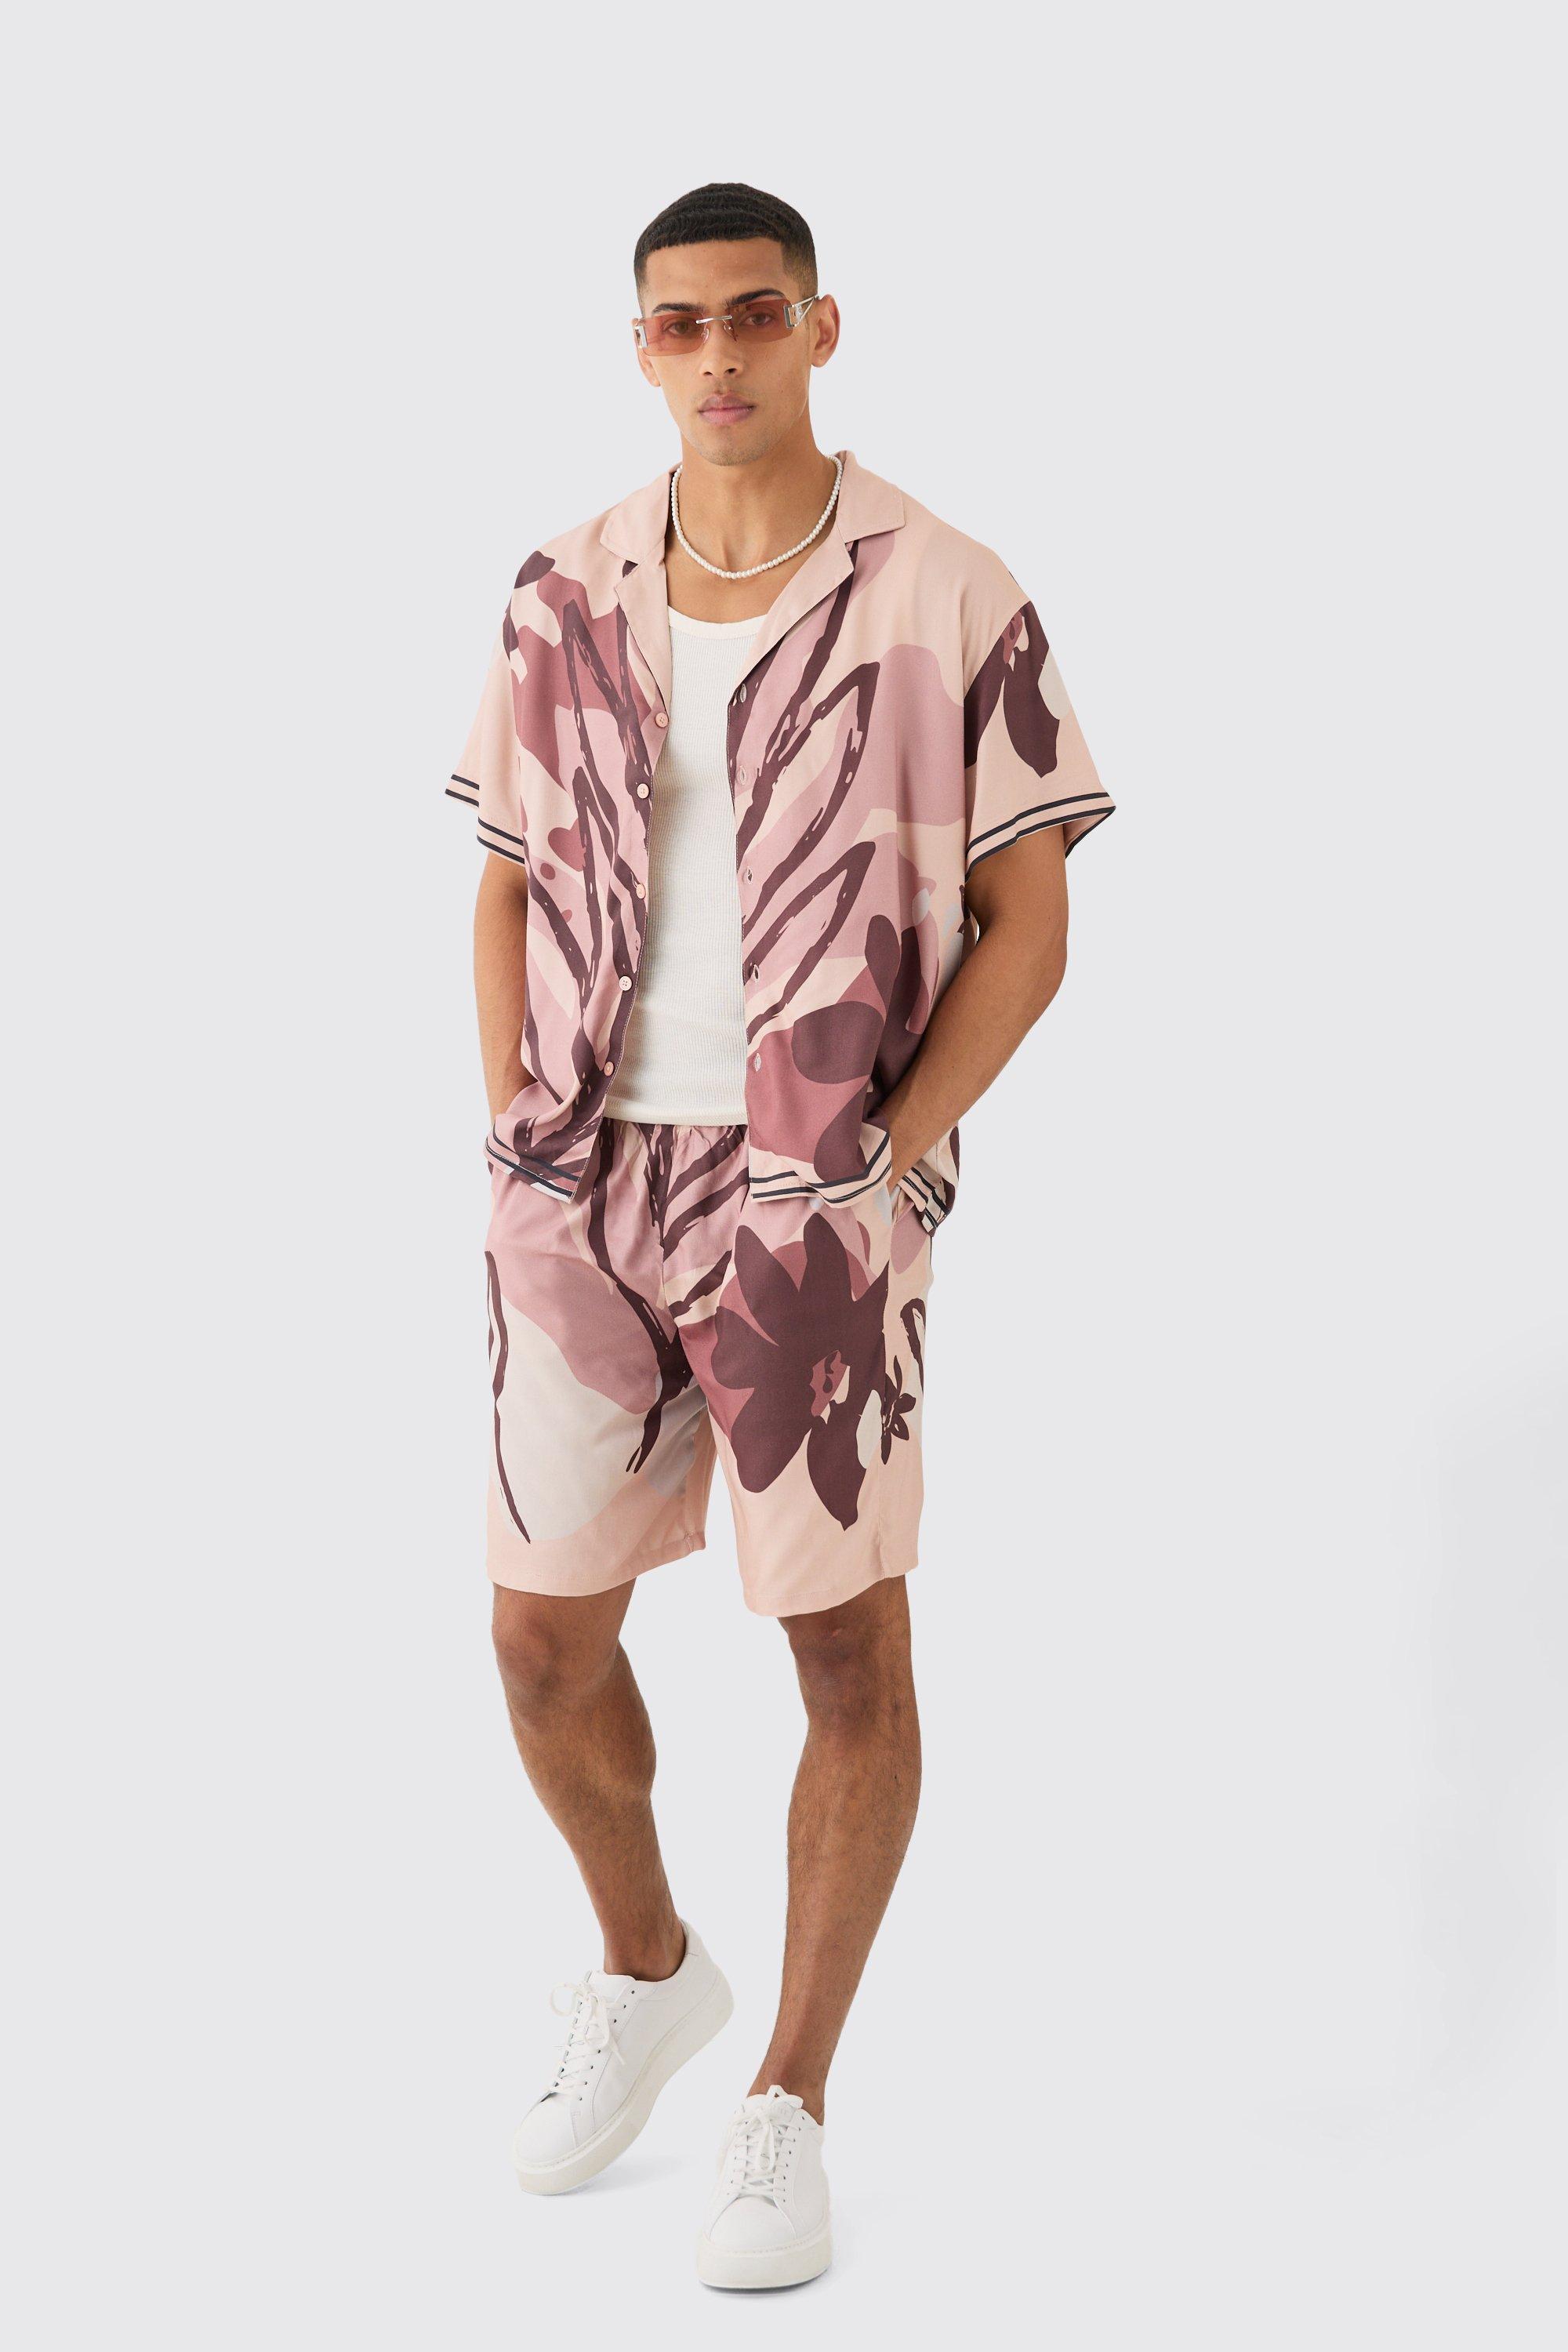 Image of Boxy Viscose Abstract Flower Shirt & Short, Beige